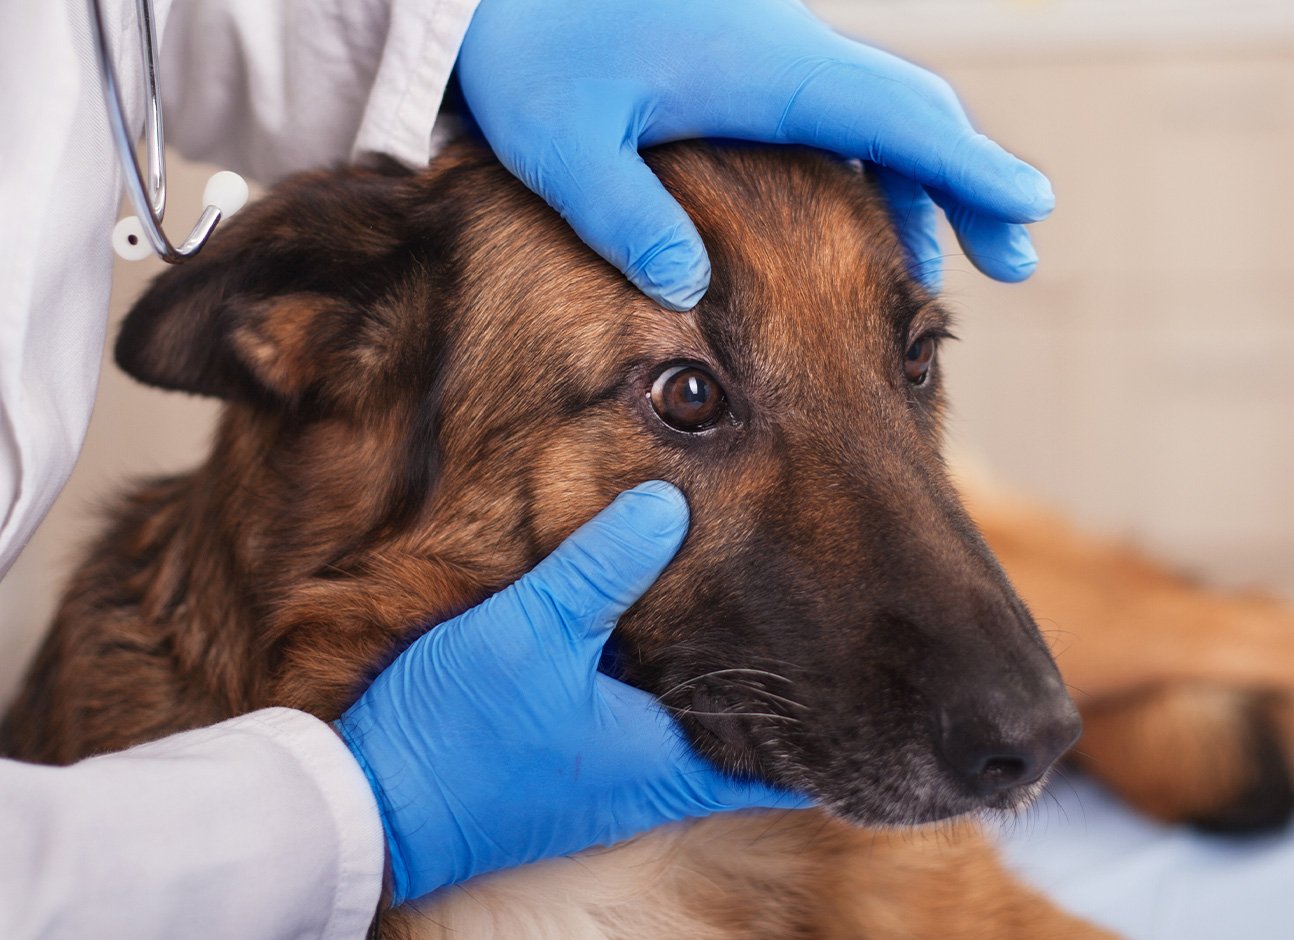 GLAUCOMA IN DOGS